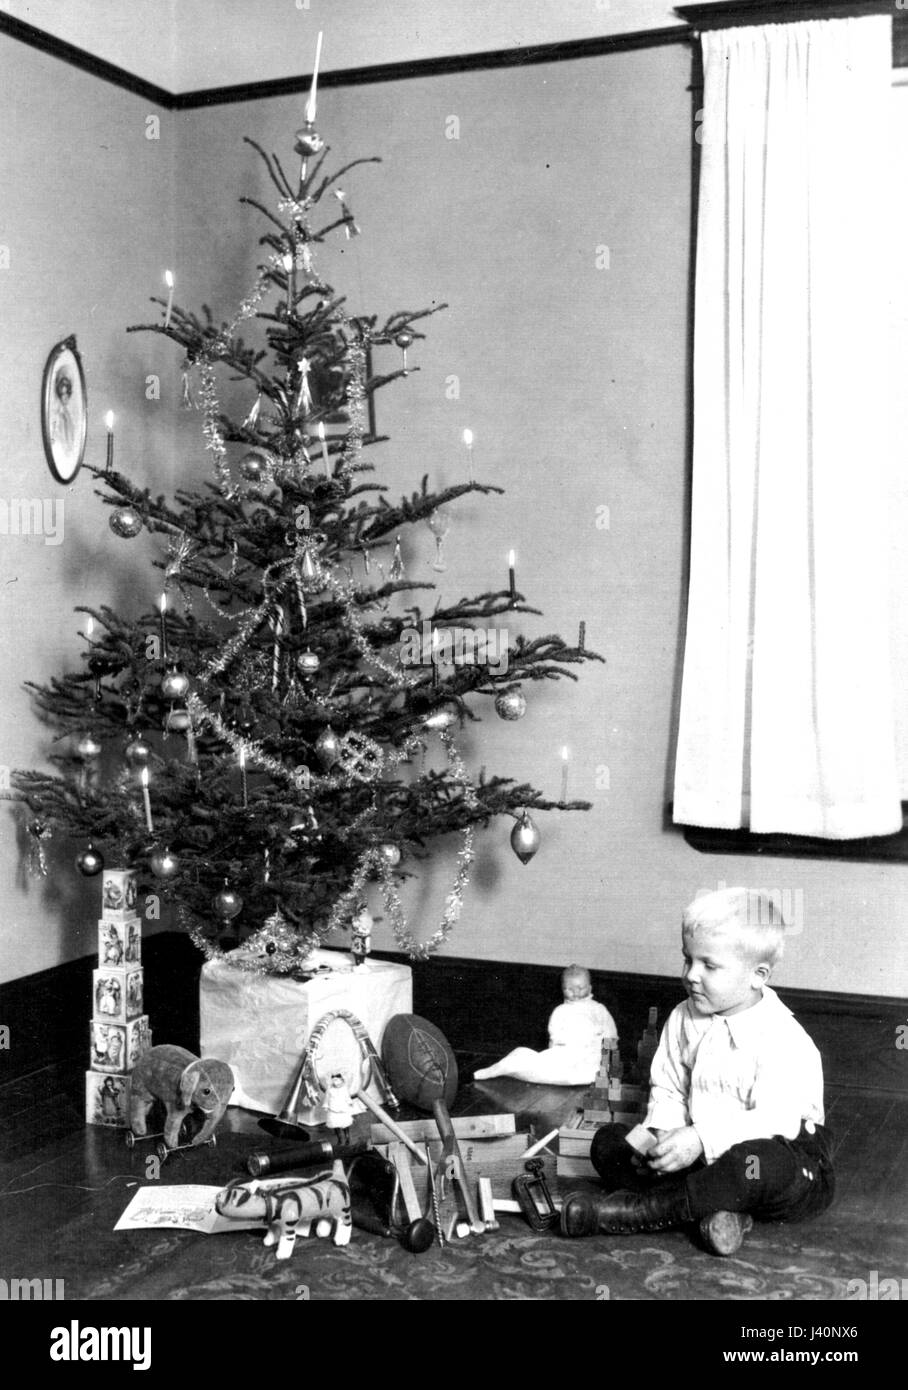 A young boy seated next to the family Christmas tree, which has lighted candles, c.1915.  Many gifts are laid out, including a toy elephant, toy tools, a football, children's blocks, toy horn, a doll, etc.   To see my other Christmas-related vintage images, Search:  Prestor  vintage  holiday Stock Photo